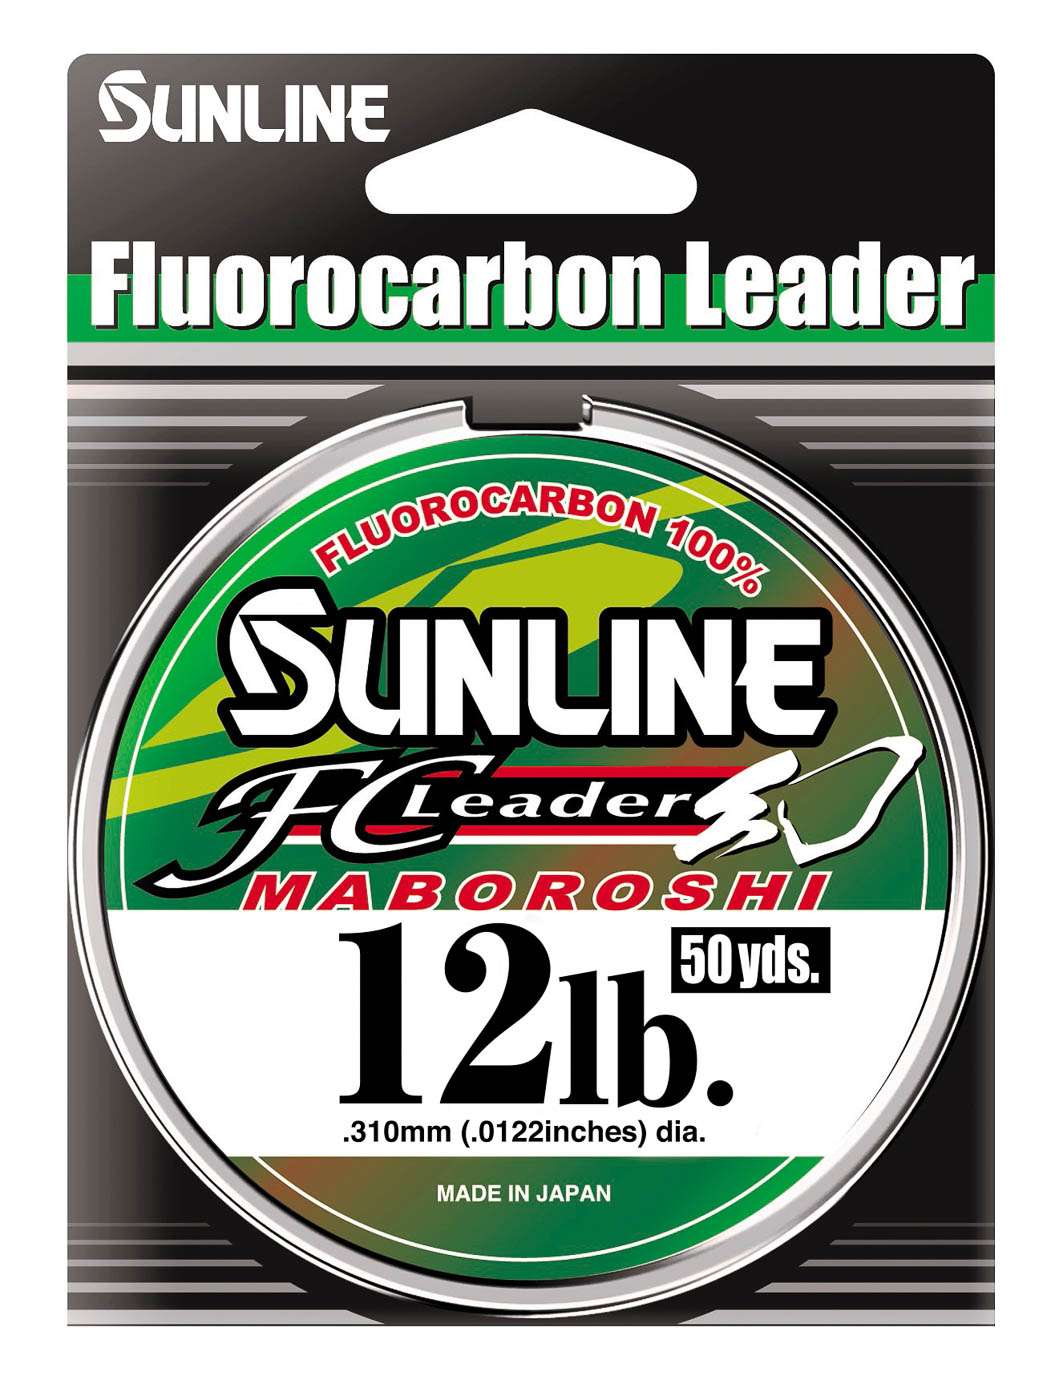 <p><strong>Sunline Maboroshi FC Leader</strong></p><p>Maboroshi is made from a 100% Fluorocarbon leader material featuring five metered colors to blend in better with the ambient environment. The color changes every 6 inches with repeating colors of Moss Green, Green, Gray, Natural Clear and Reddish Brown. Available in 5-, 6-, 7-, 8-, 10-, 12-, 14-, 16-, 20- and 50-yard spools. $15.49. <a href=